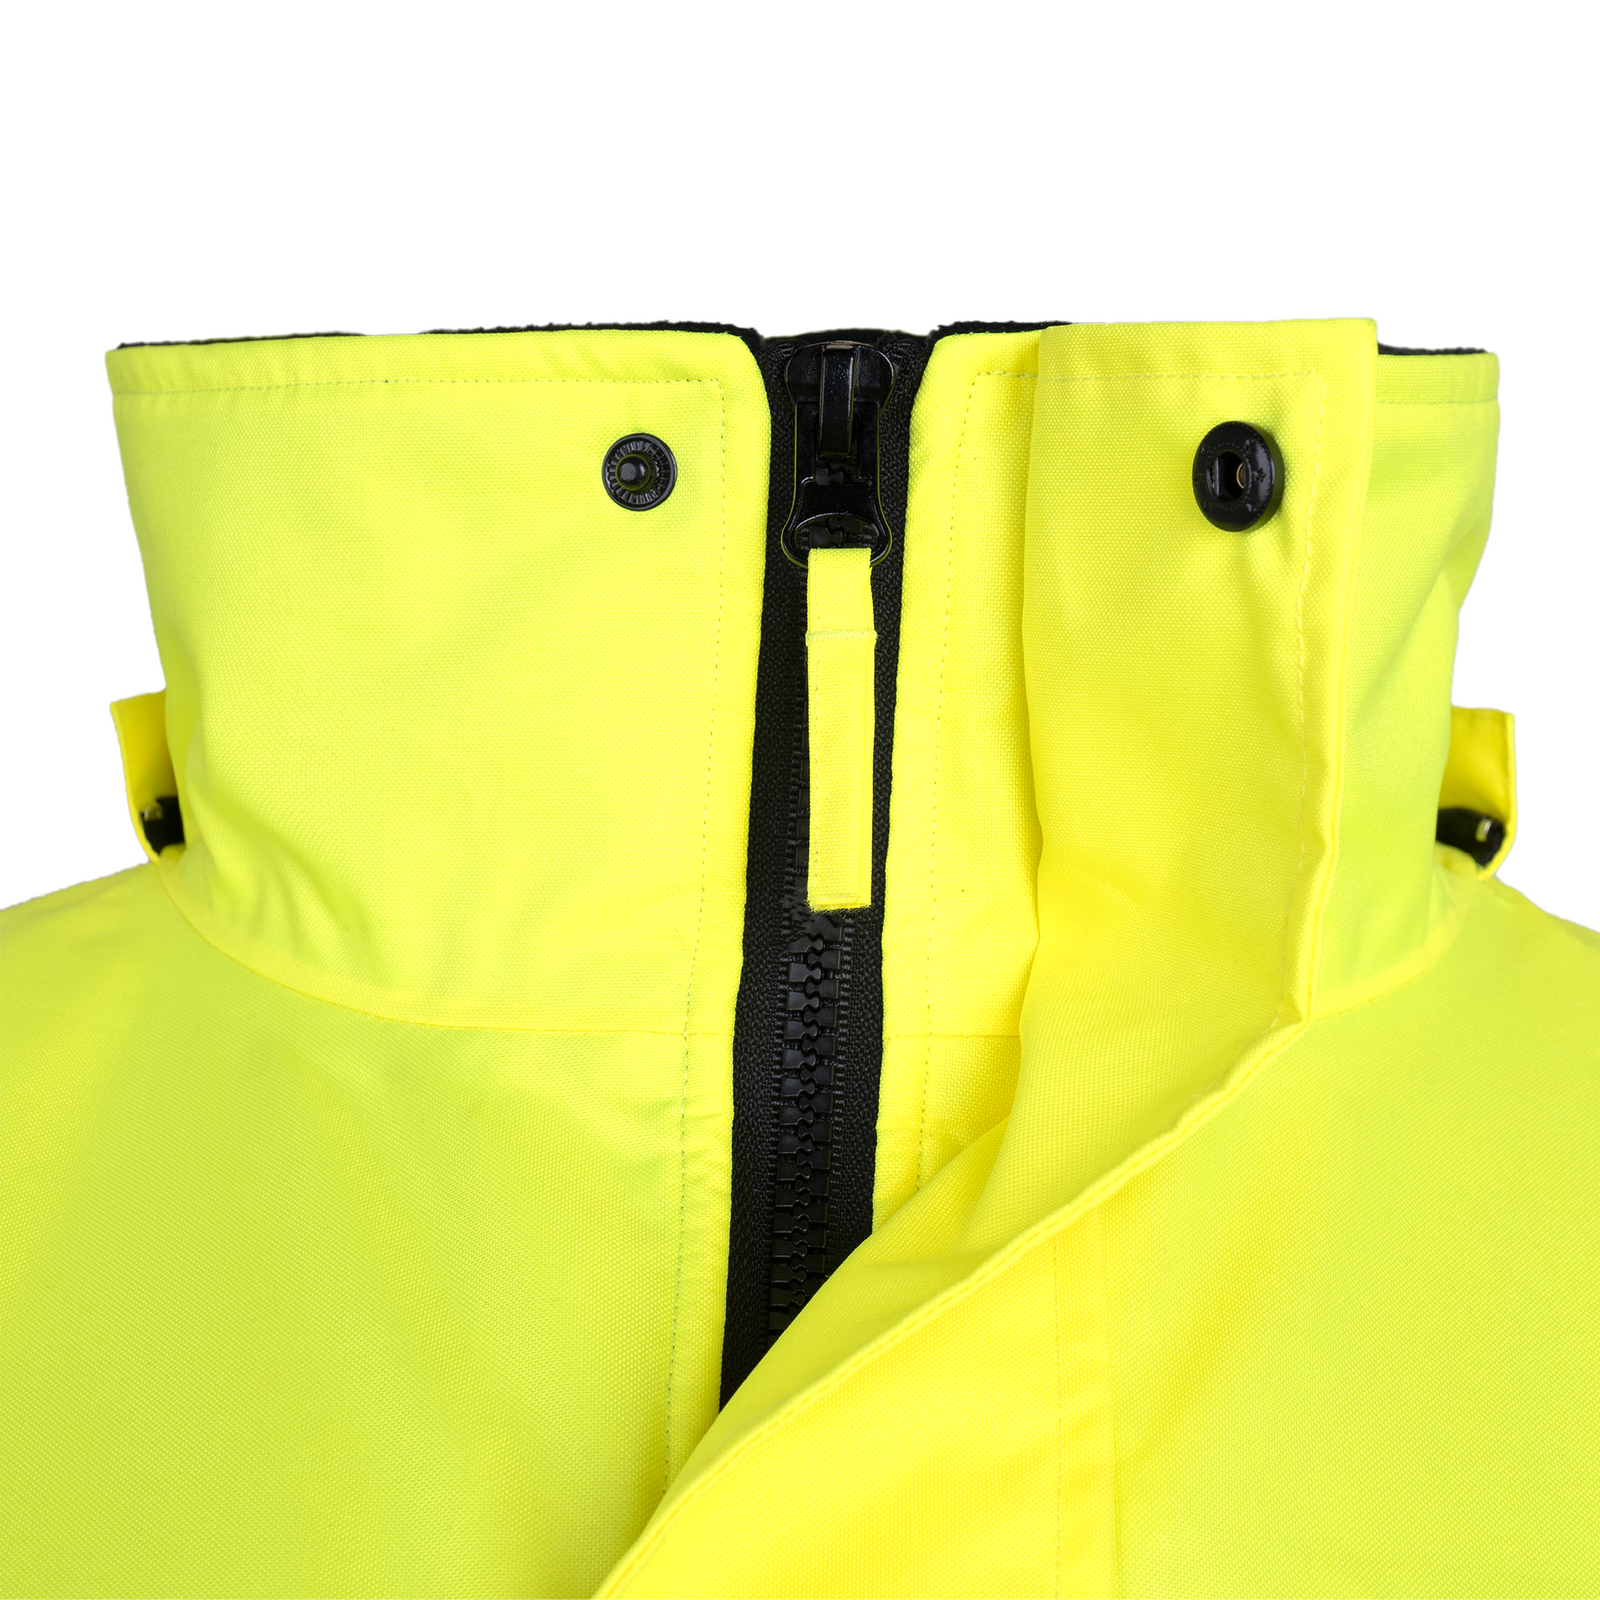 View of the yellow and black Hi-vis safety jacket with fleece liner, heat transfer reflective tapes, removable hoodie and pockets. 